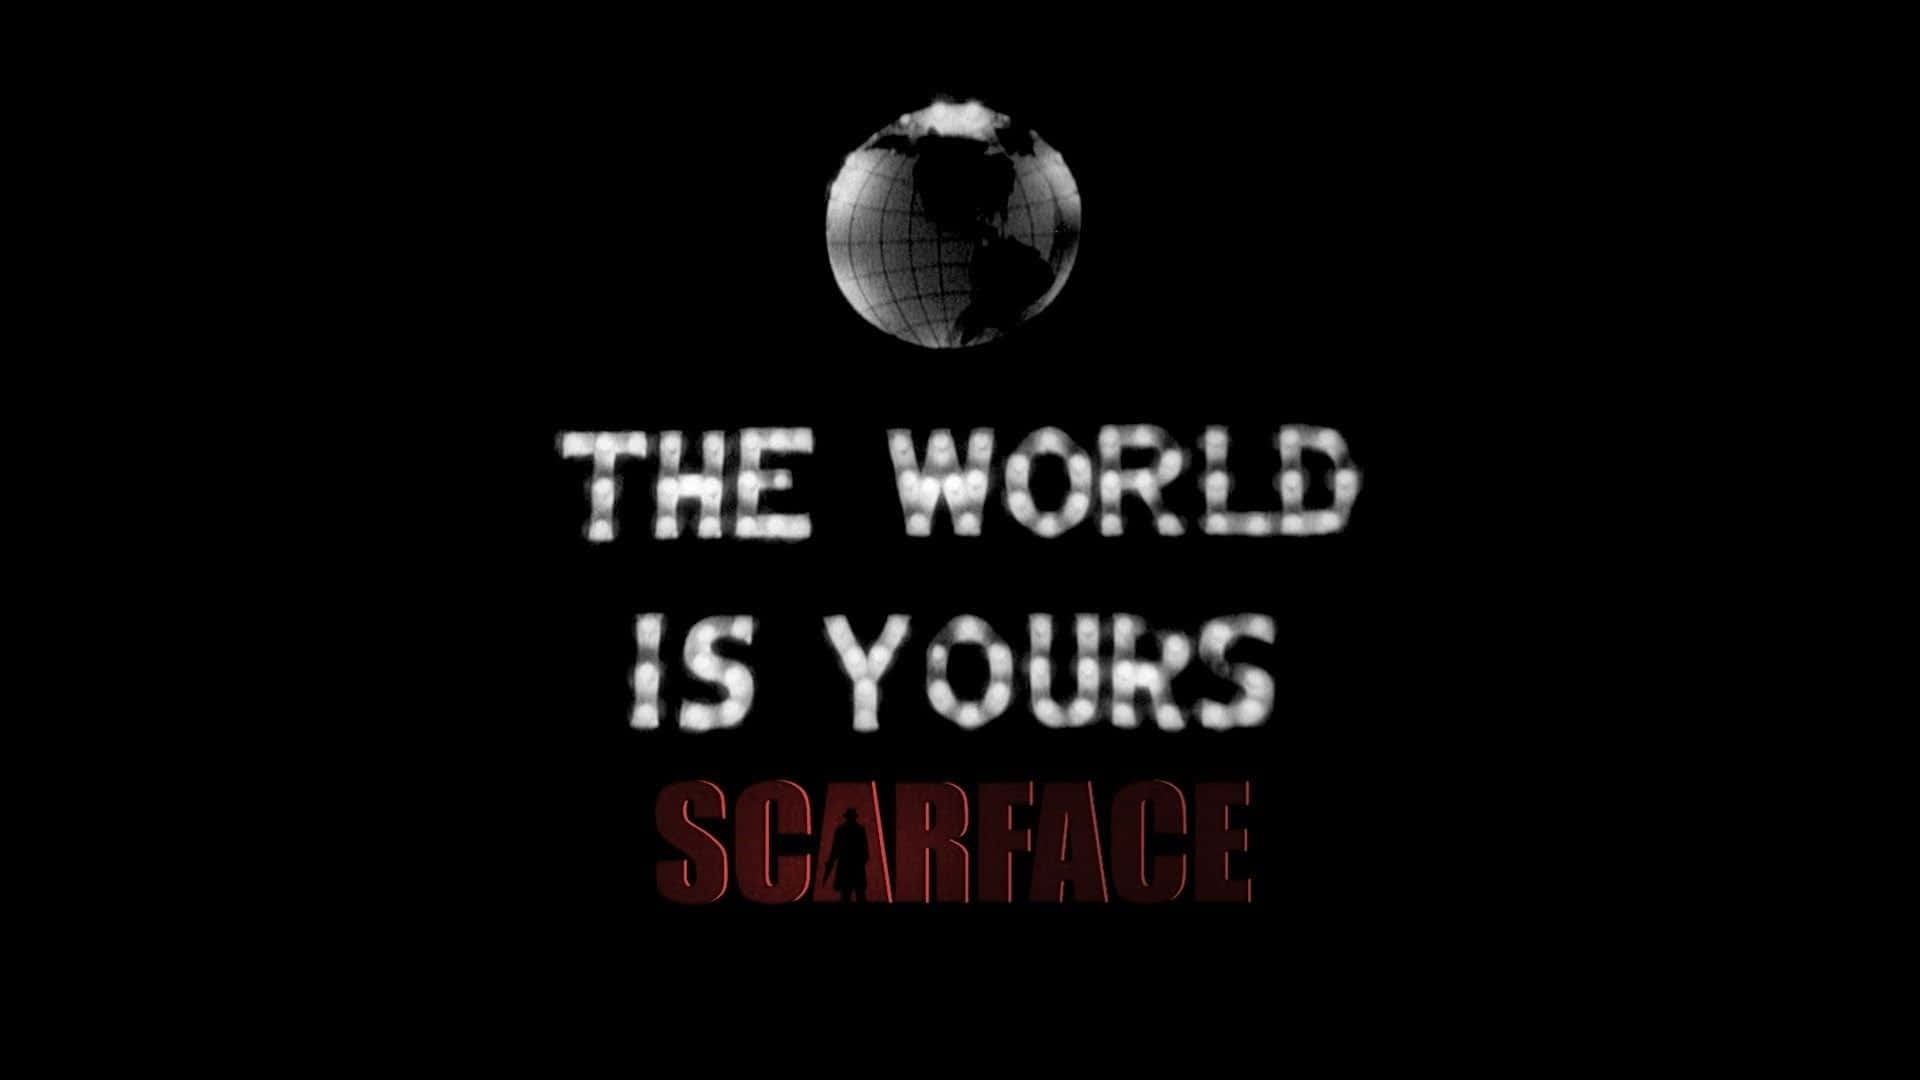 An iconic image of Scarface rendered in stunning detail. Wallpaper